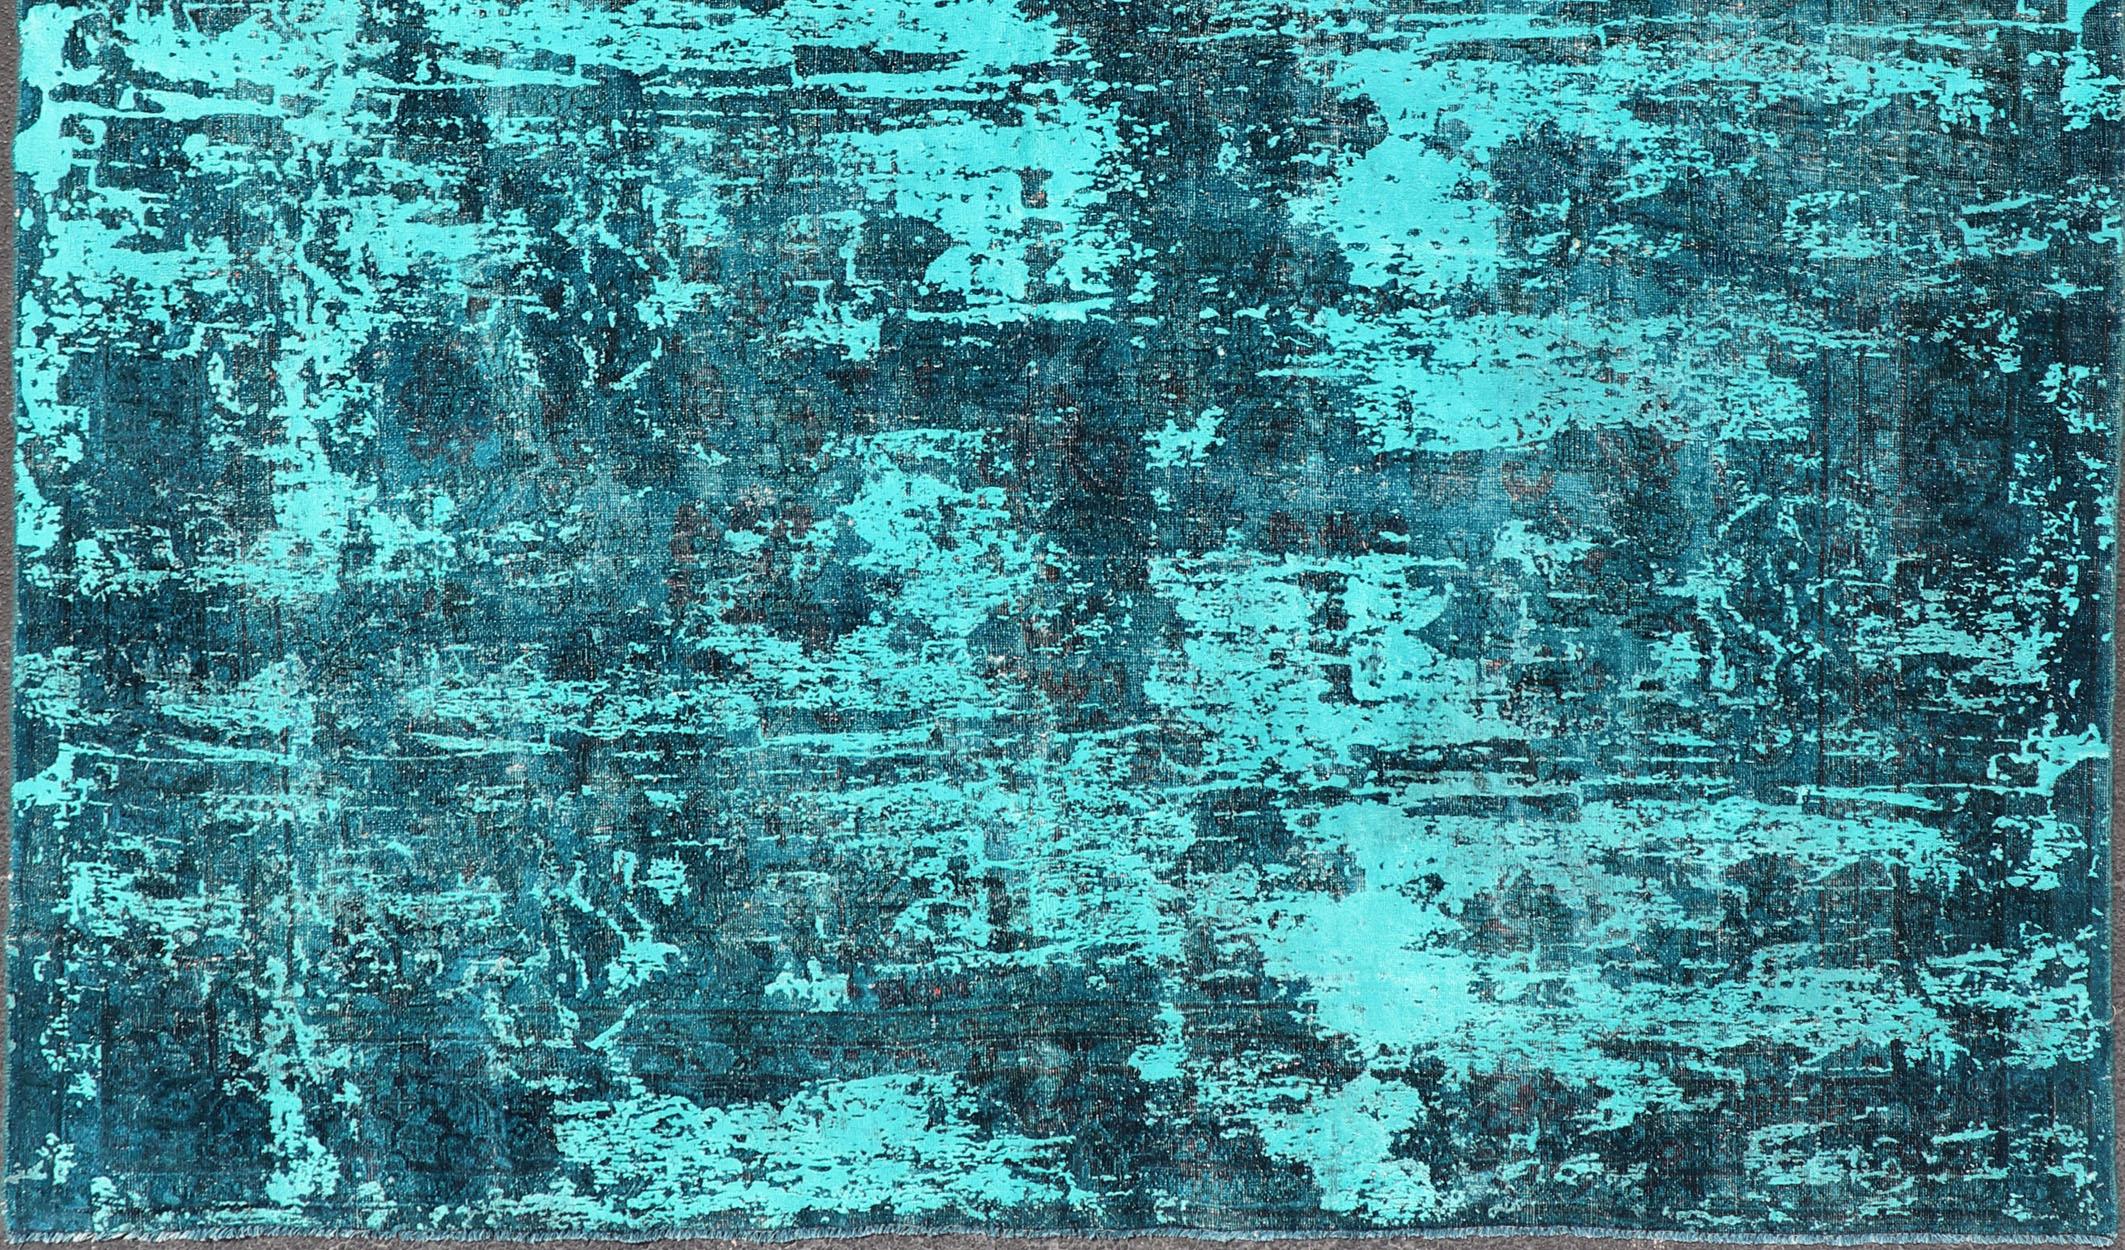 Shades of Turquoise, blue, teal and green modern design vintage rug, Rug/ D-0604 Type/ Modern

This vintage rug is one-of-a-kind with a distressed finish that emphasizes a modern. Featuring a modern, yet rustic, design aesthetic, this piece fits